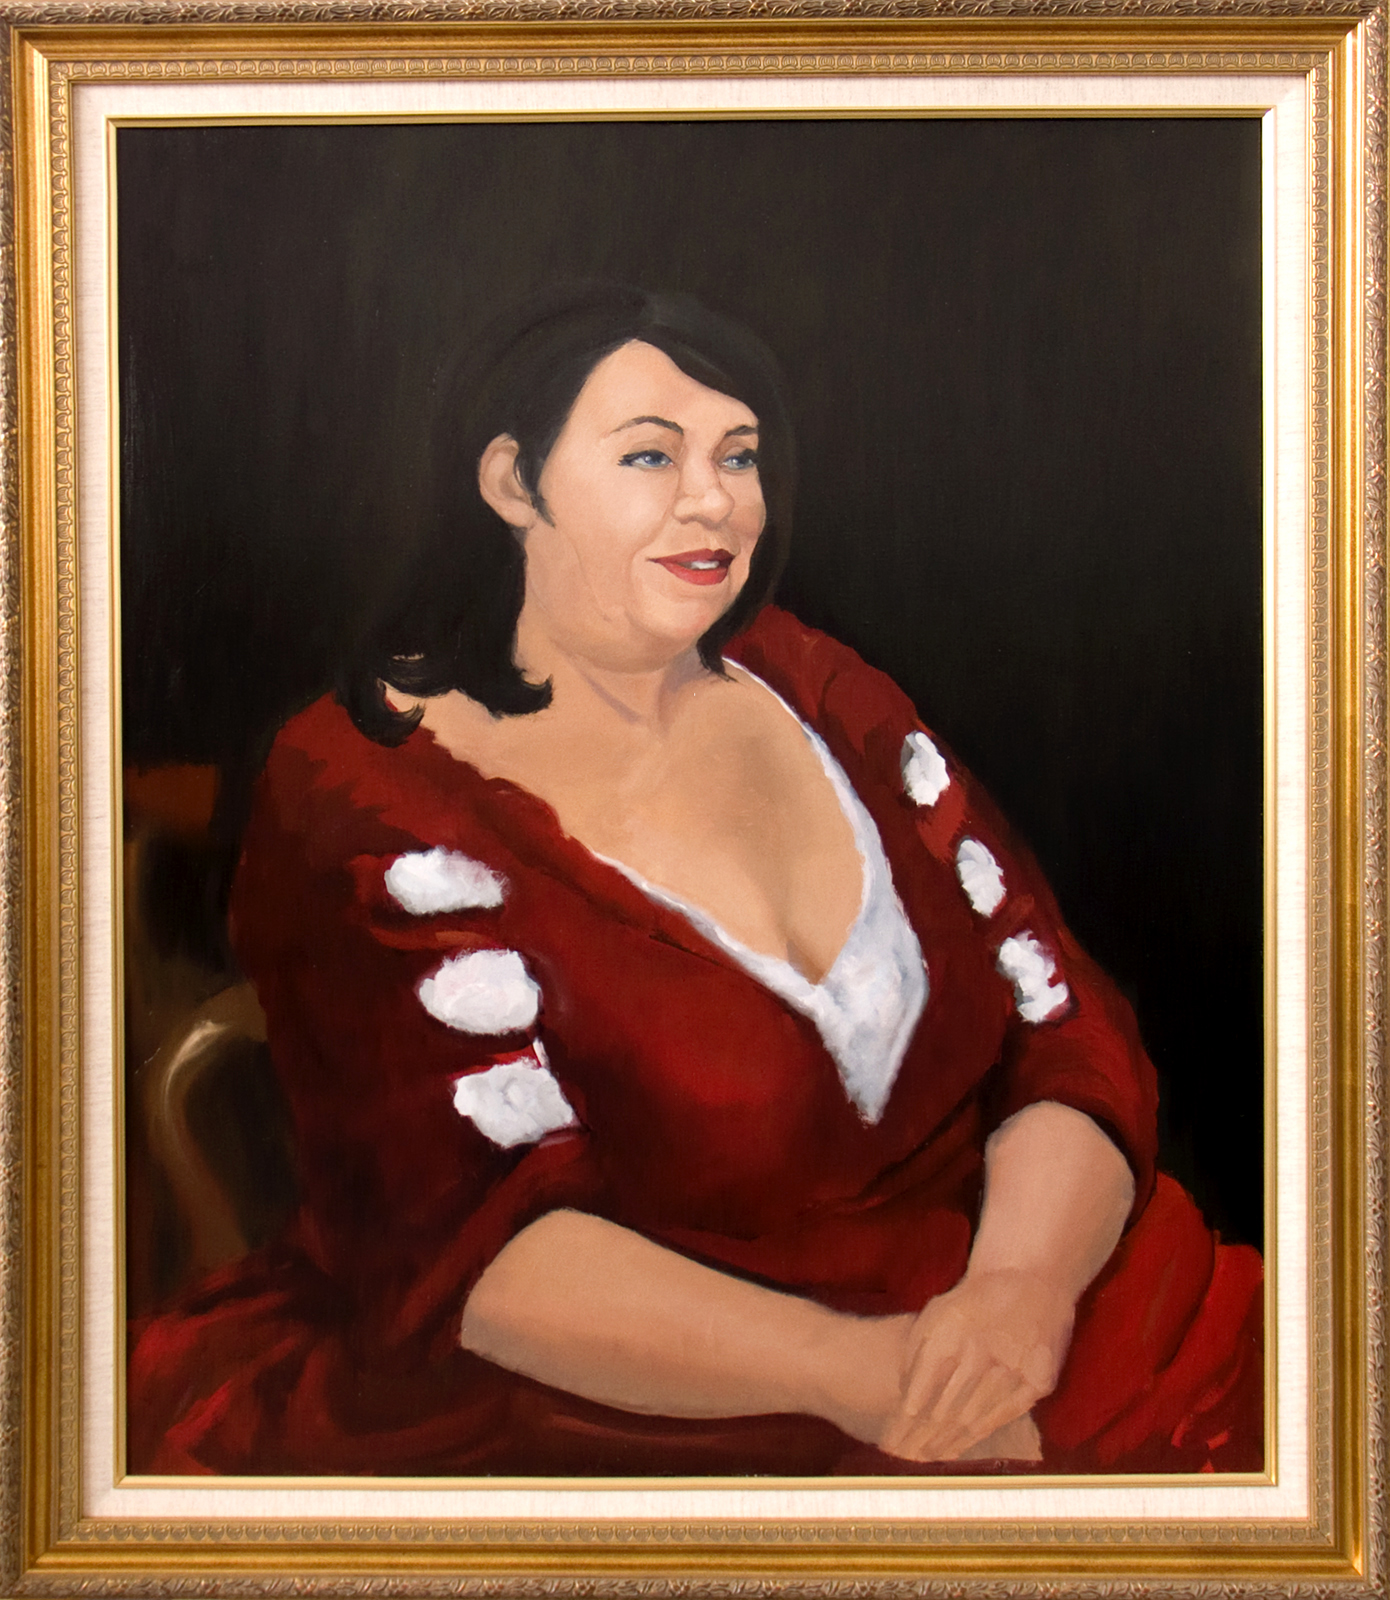 A portrait of a woman in a red dress